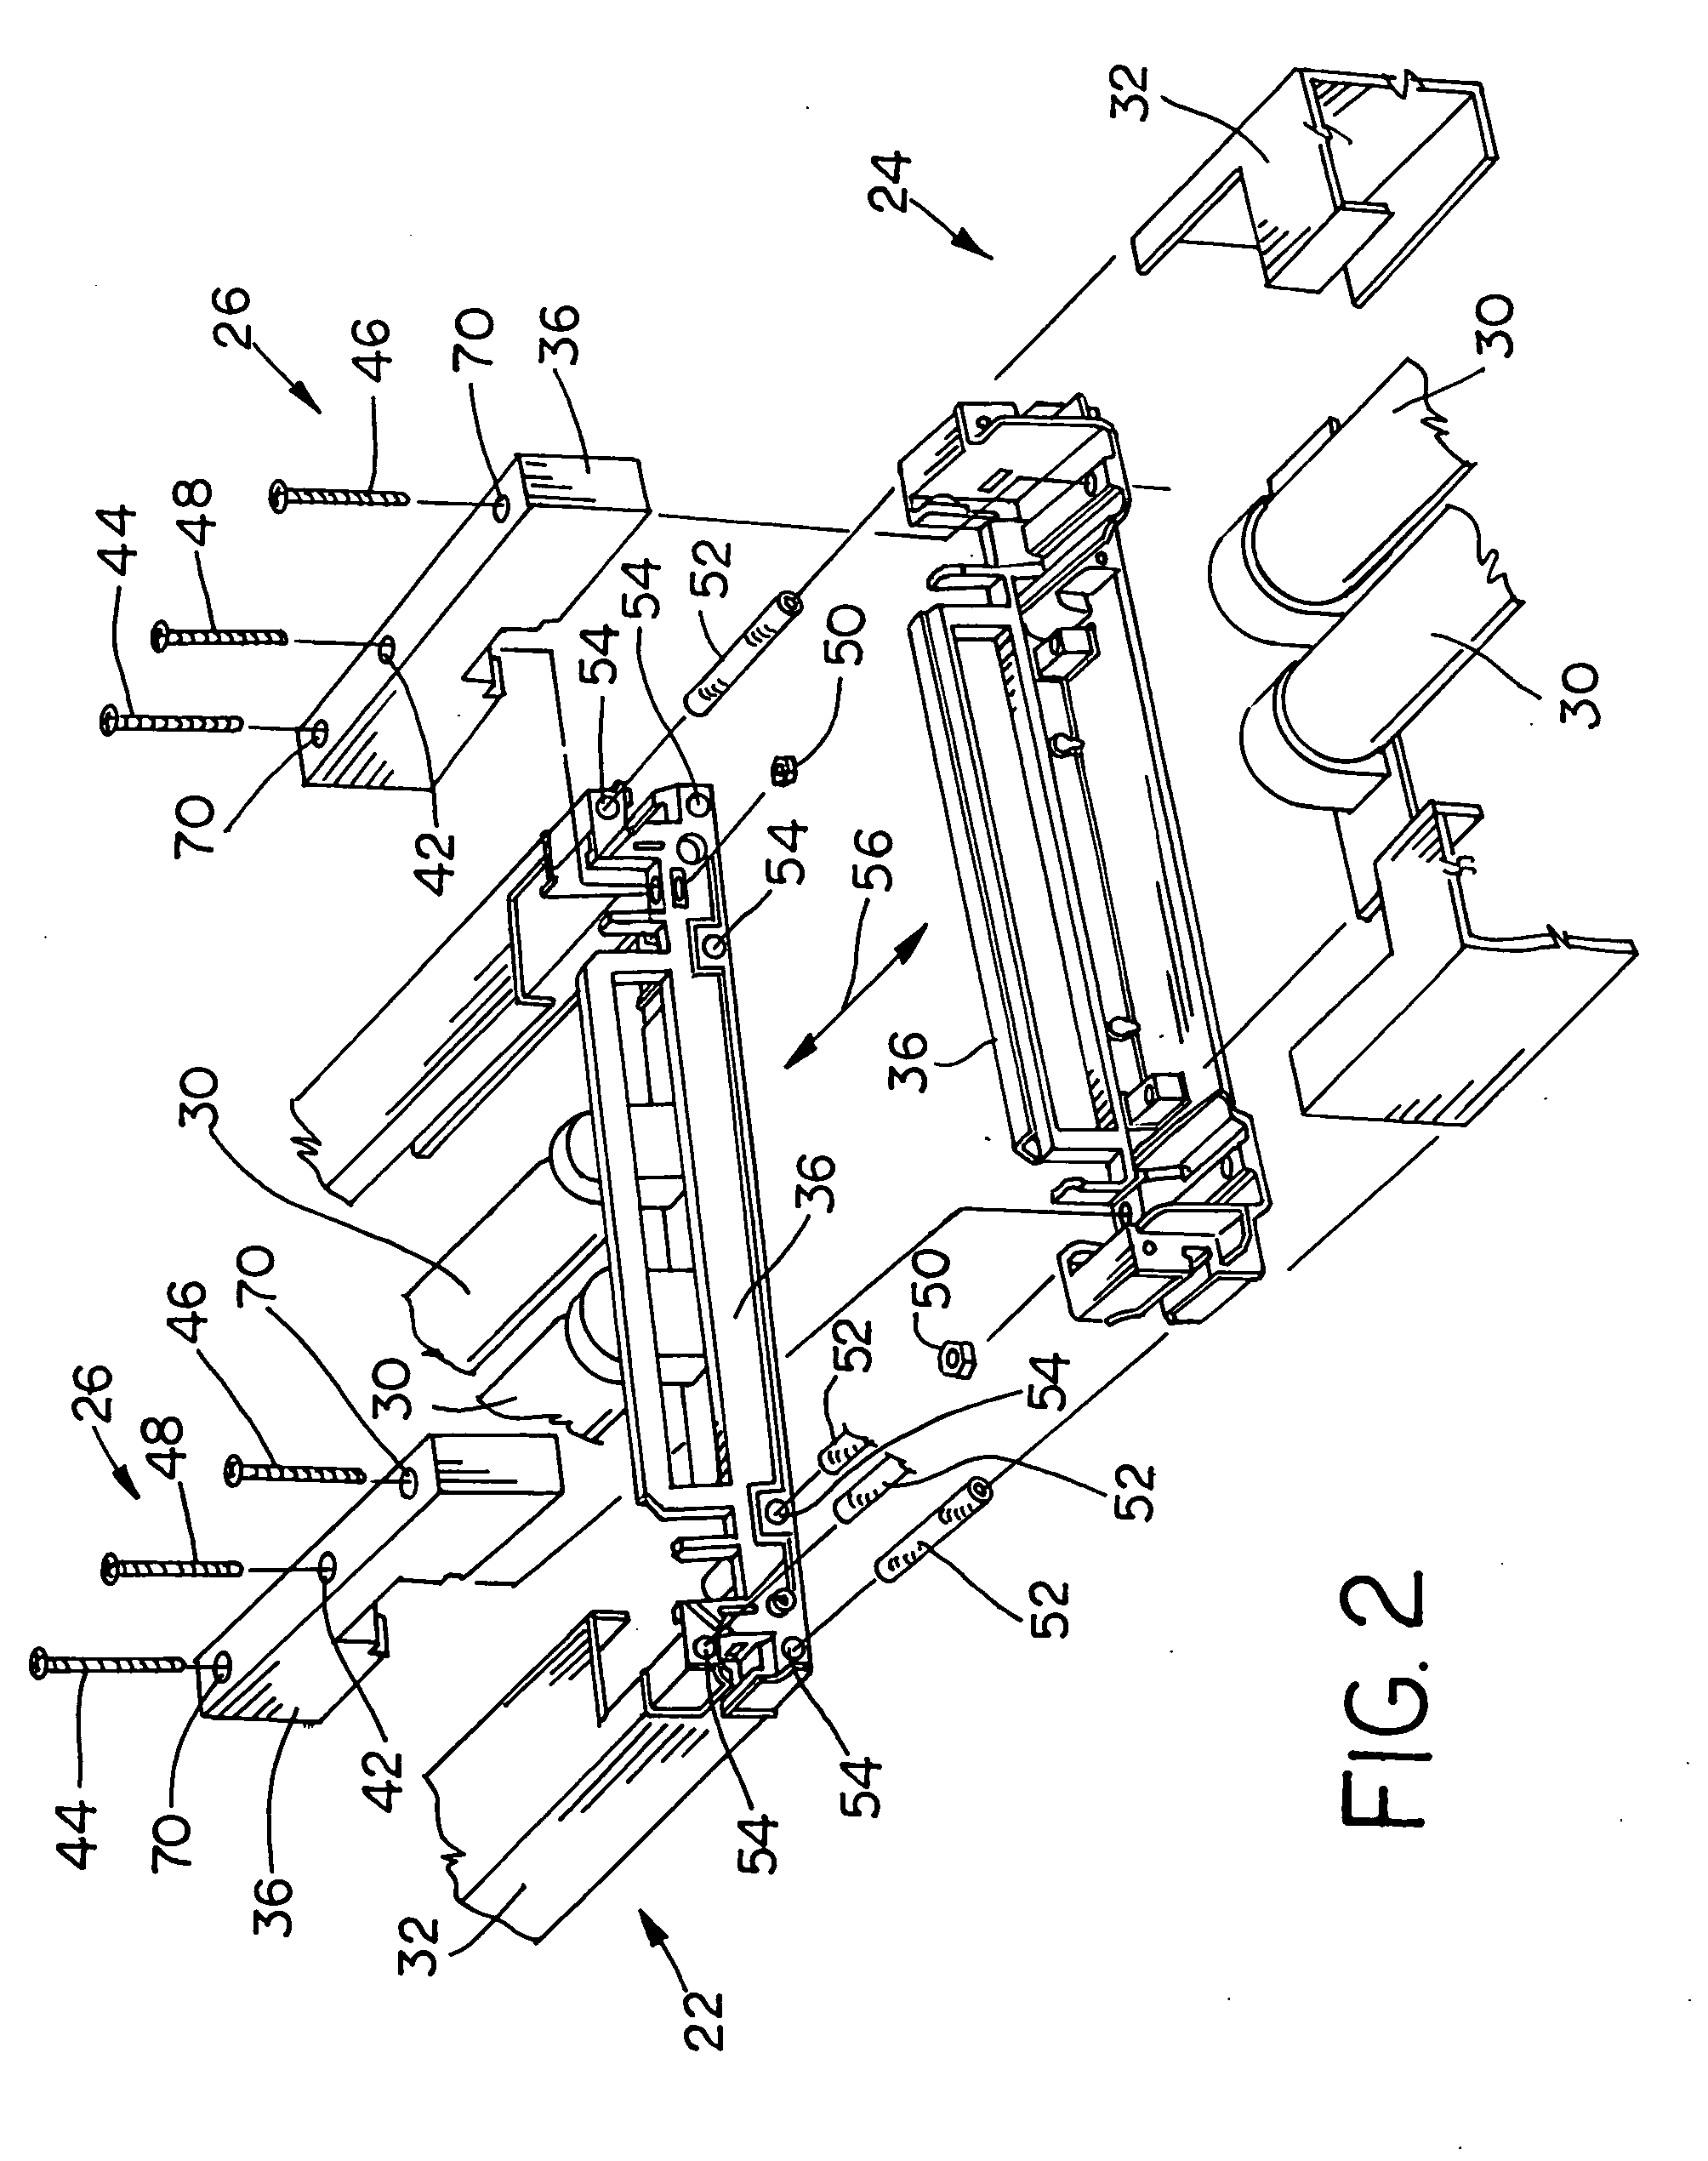 Method and apparatus for joining linear lighting fixtures to eliminate sag